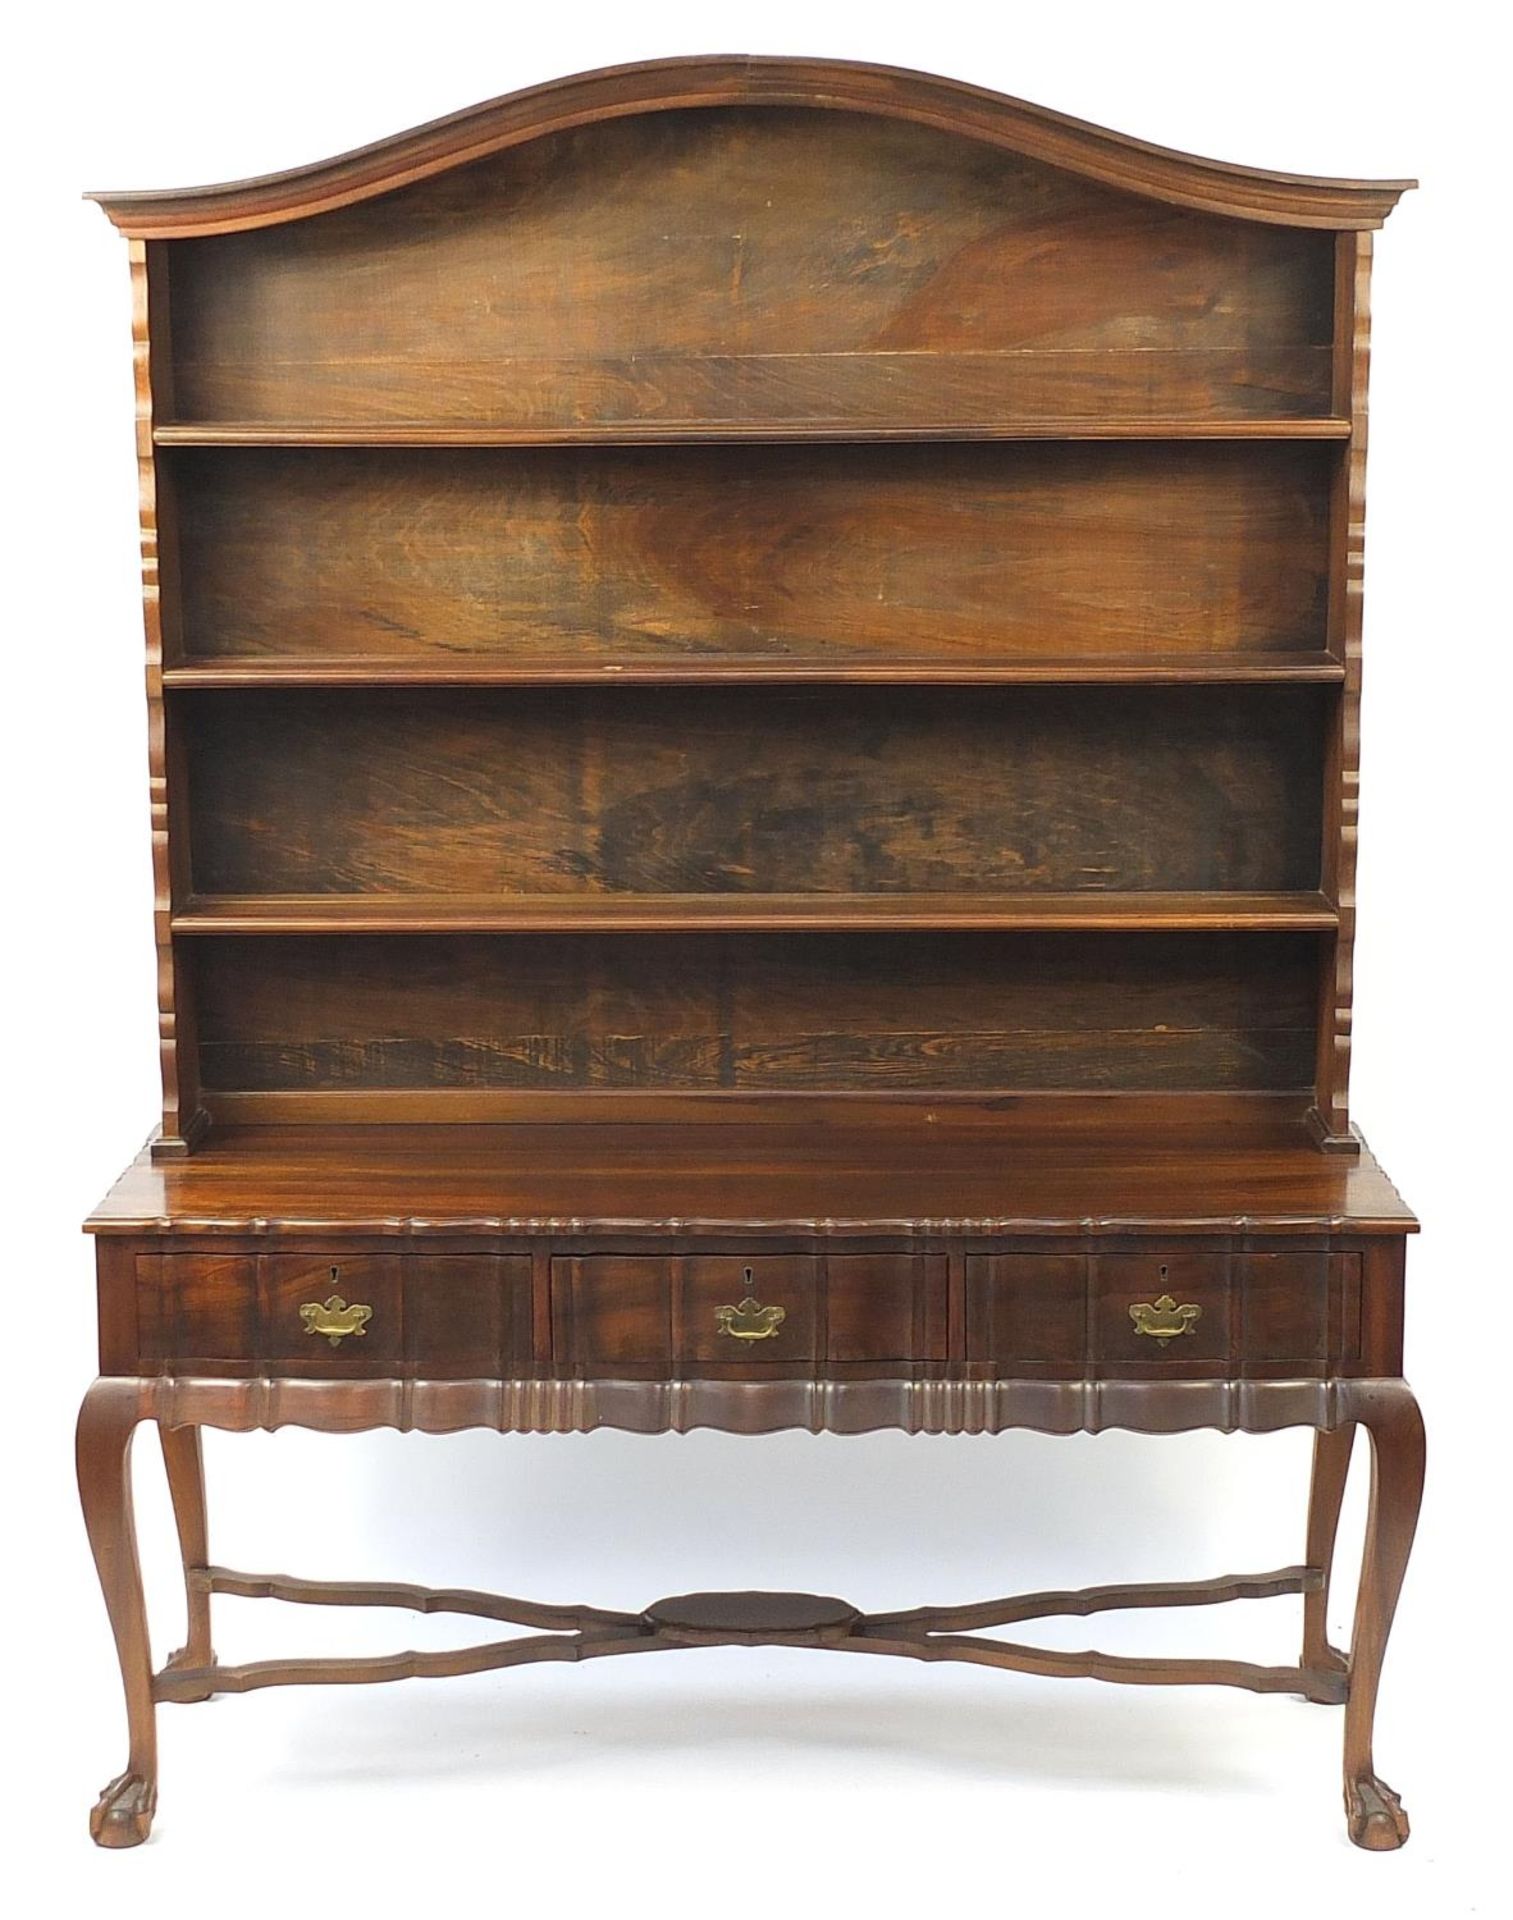 Jonker of Knysna, South African stinkwood dresser with open plate rack above three drawers, on